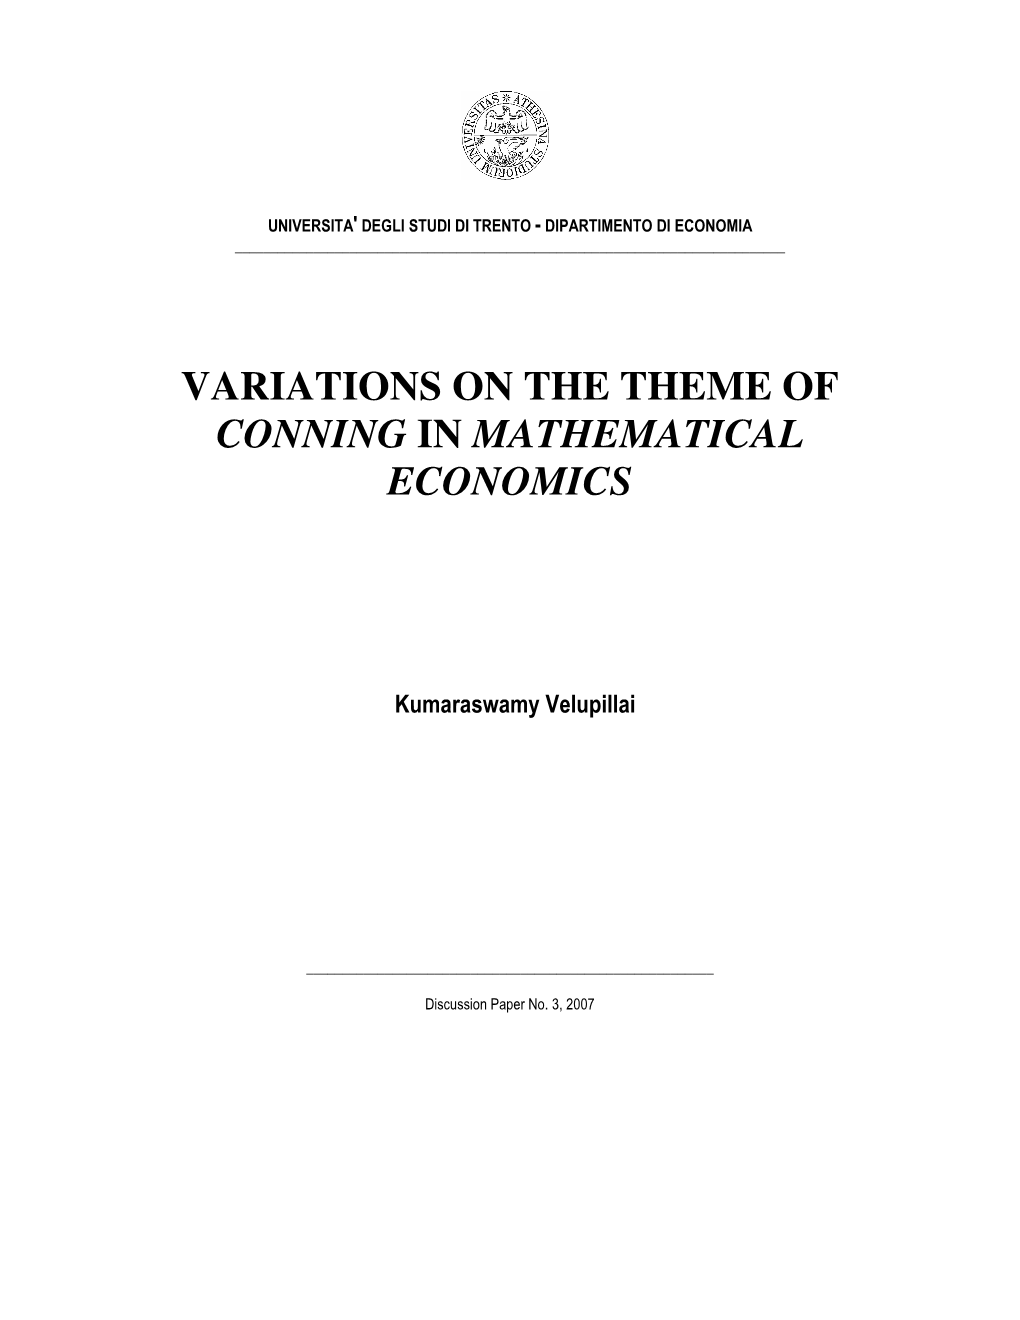 Variations on the Theme of Conning in Mathematical Economics